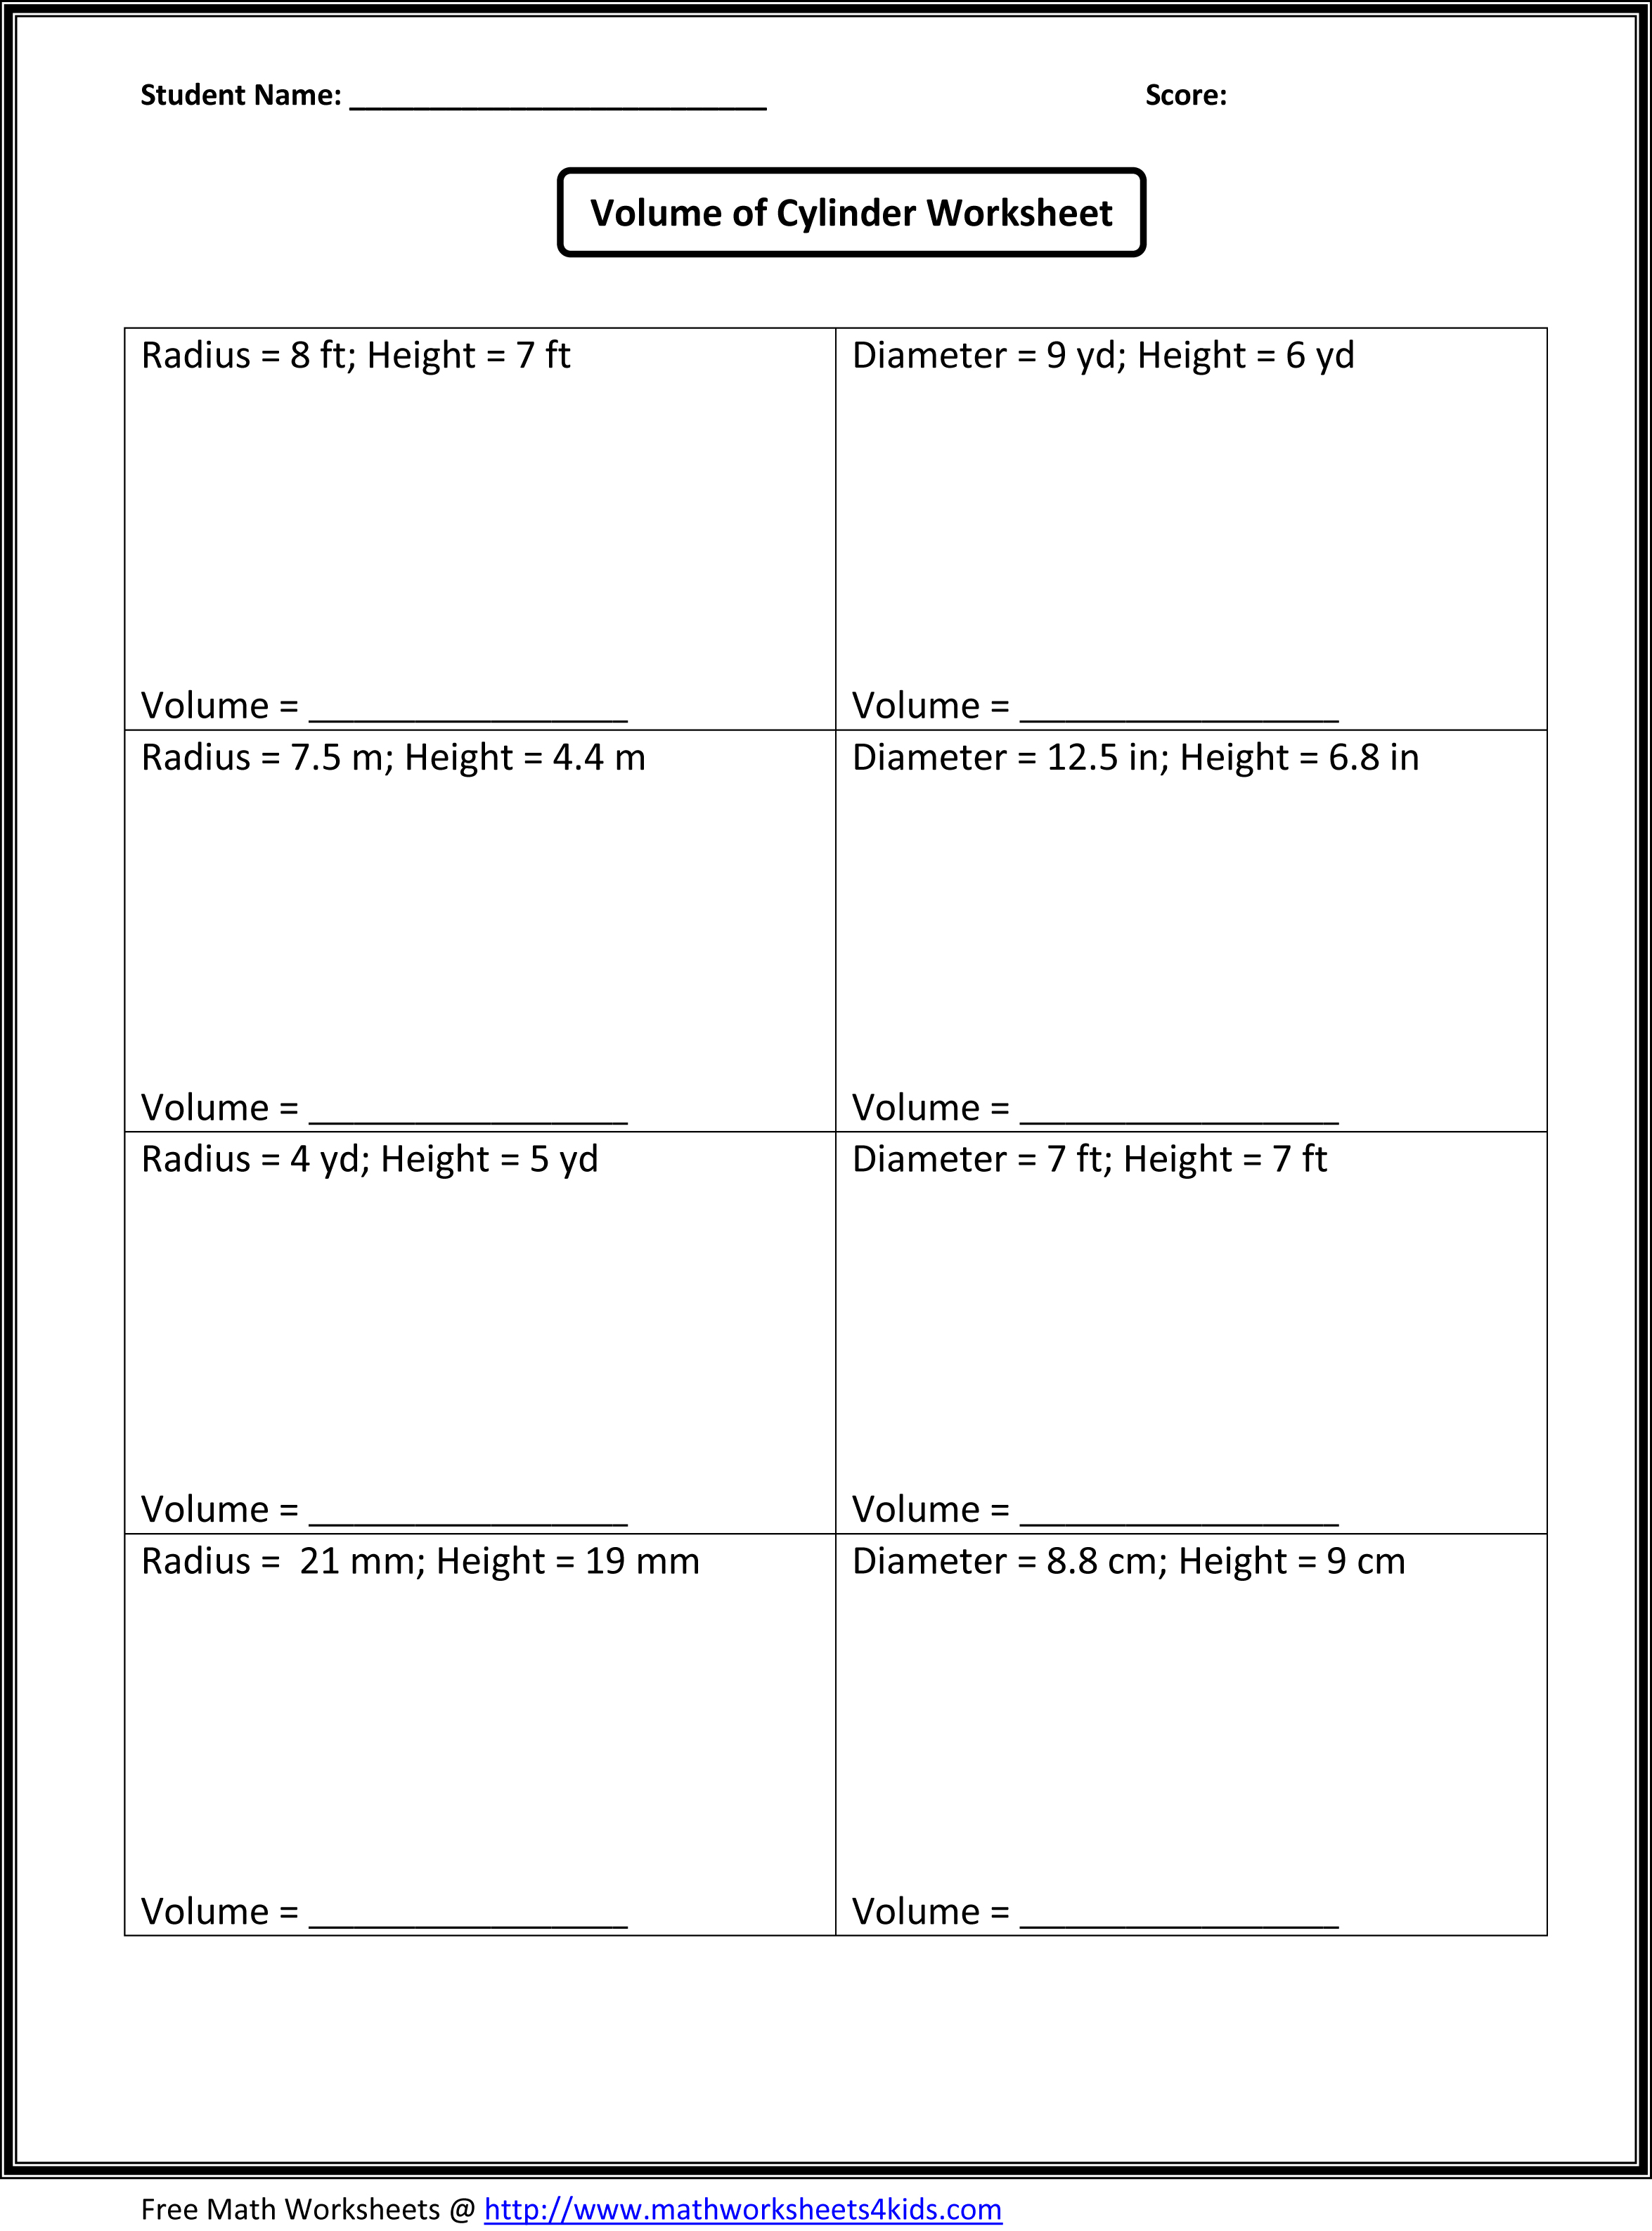 14 Best Images Of Geometry Vocabulary Worksheet 7th Grade Math Worksheets Circle Geometry